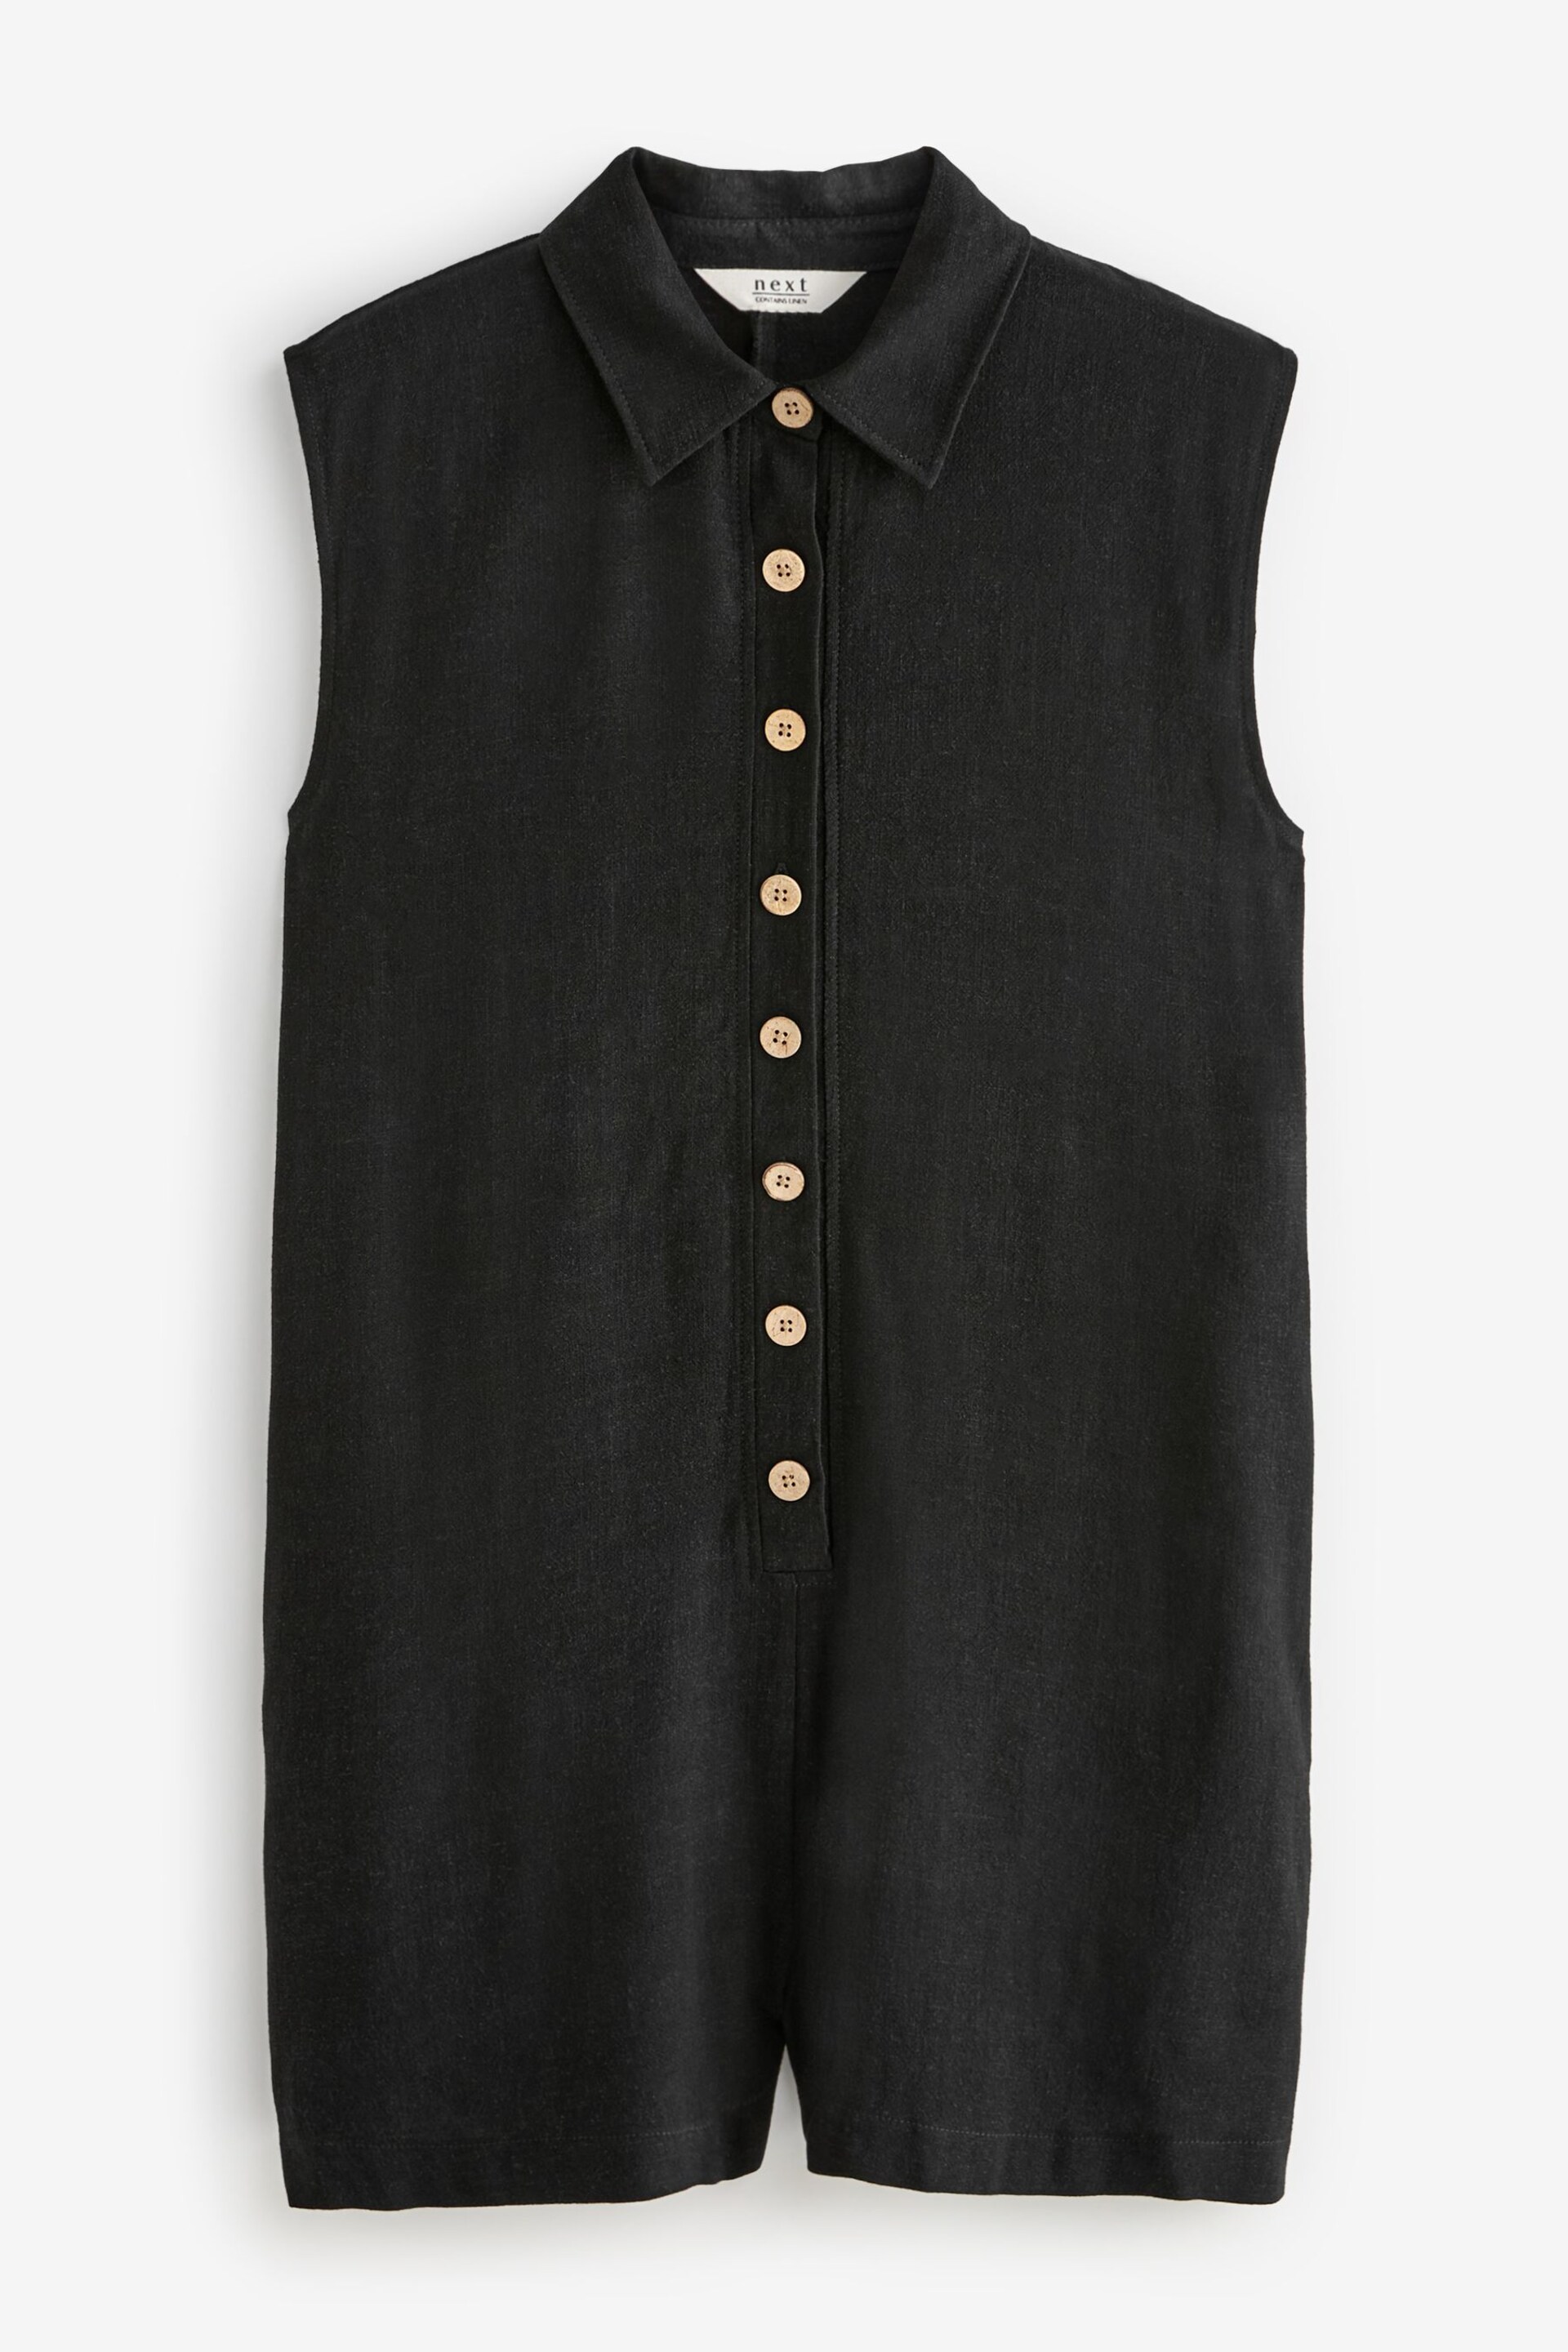 Black Button Down Romper Playsuit With Linen - Image 4 of 5